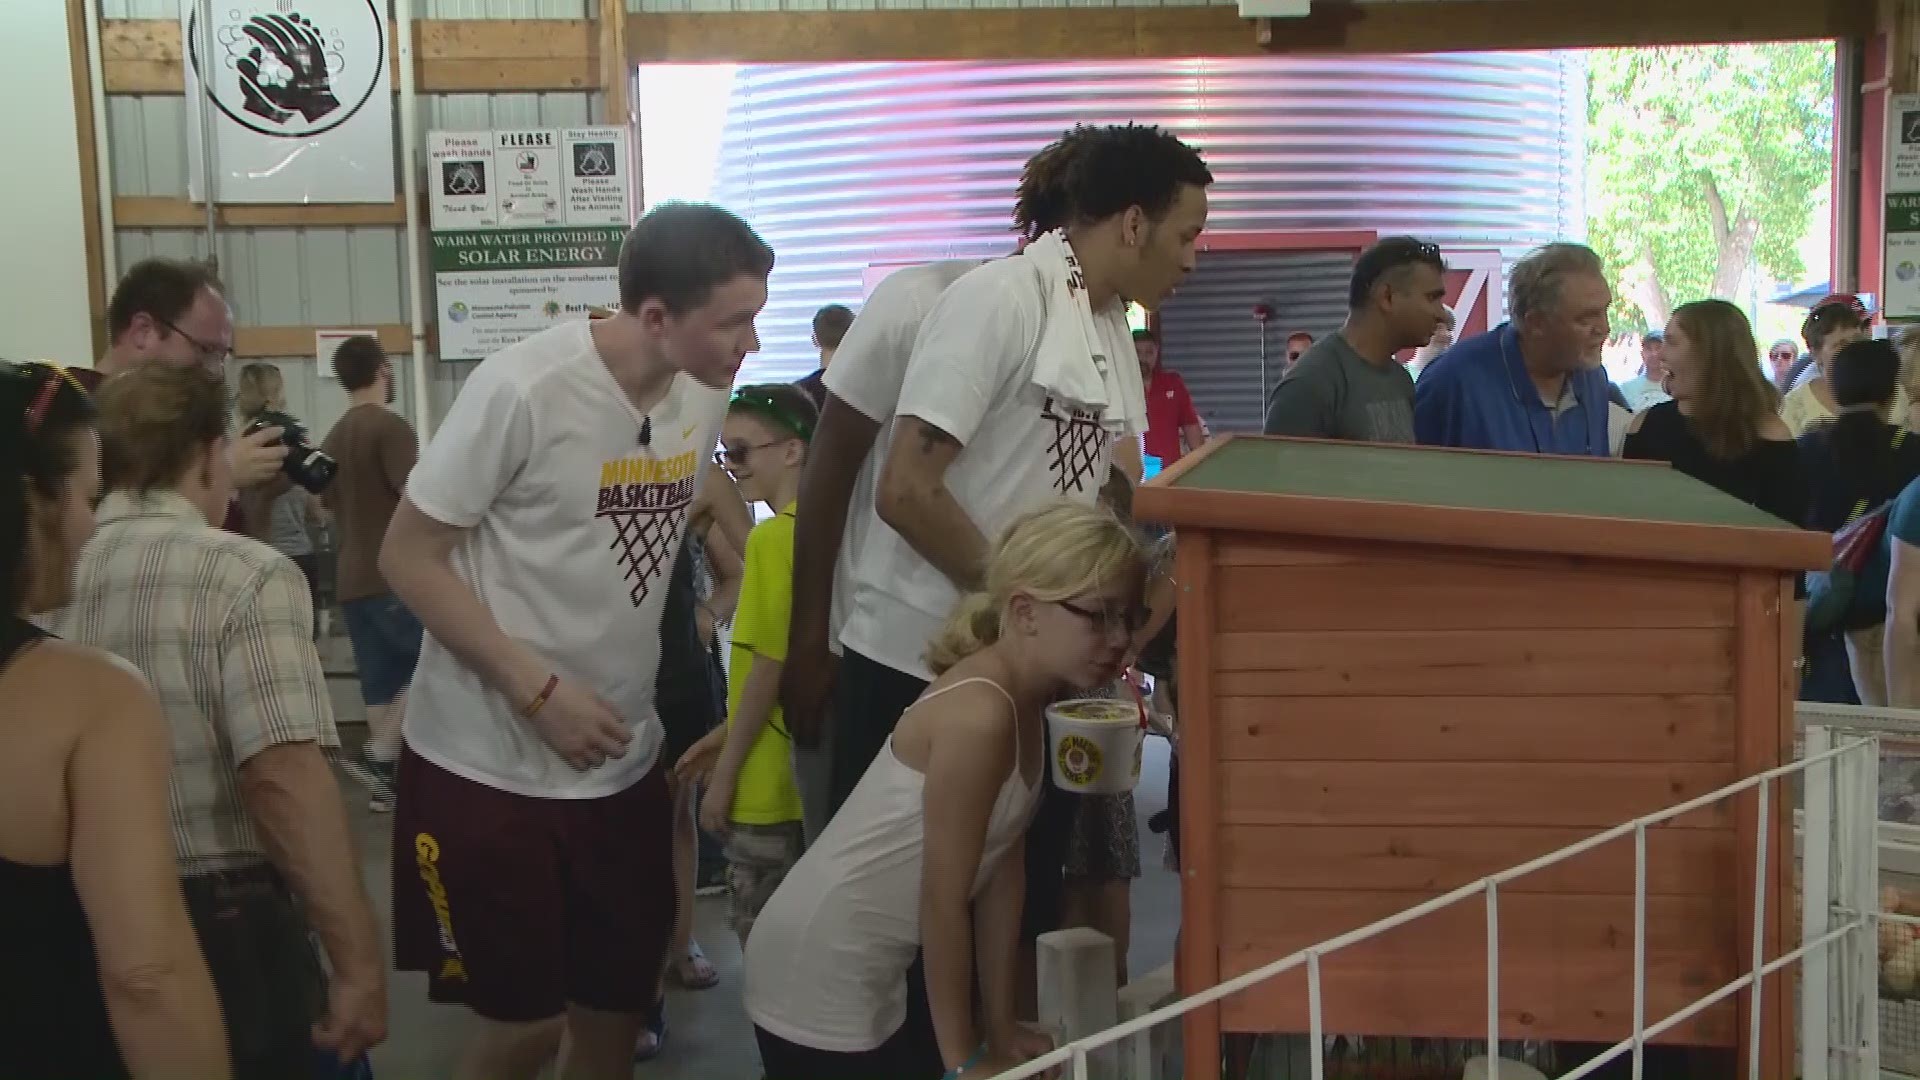 Some local Gopher basketball players took their Memphis teammate to the Minnesota State Fair.